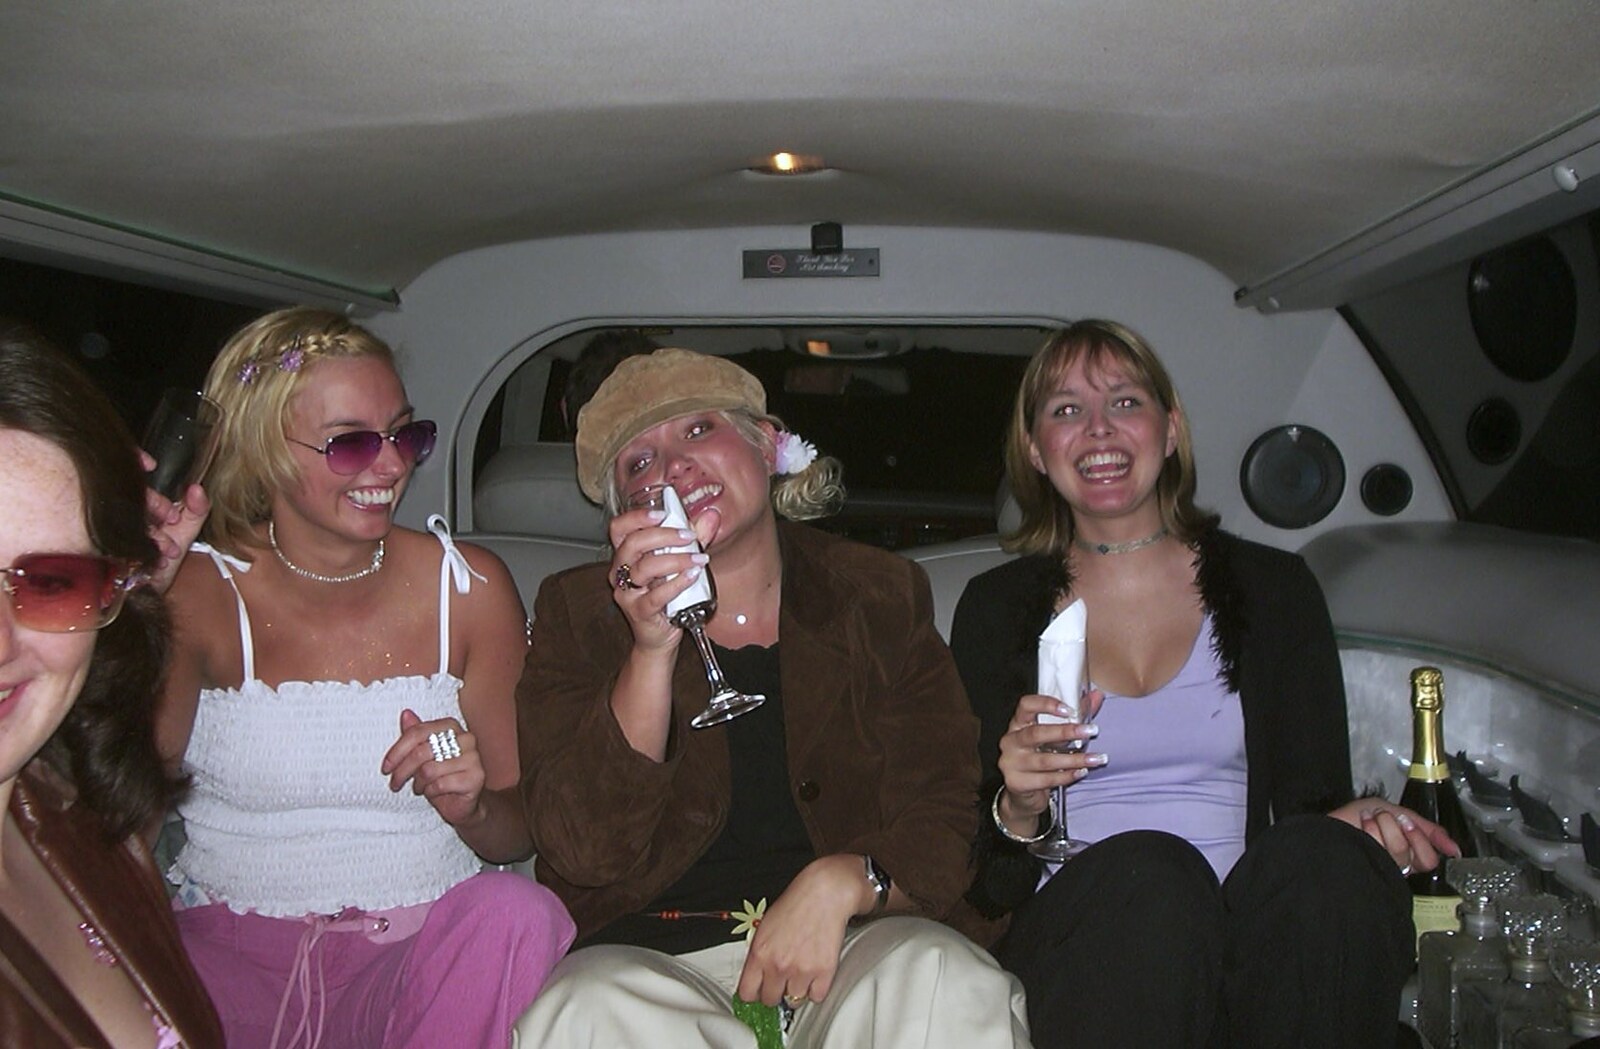 The girls in the back of the Limo from 3G Lab's Carwash Nightclub by Limo, London - 27th April 2002